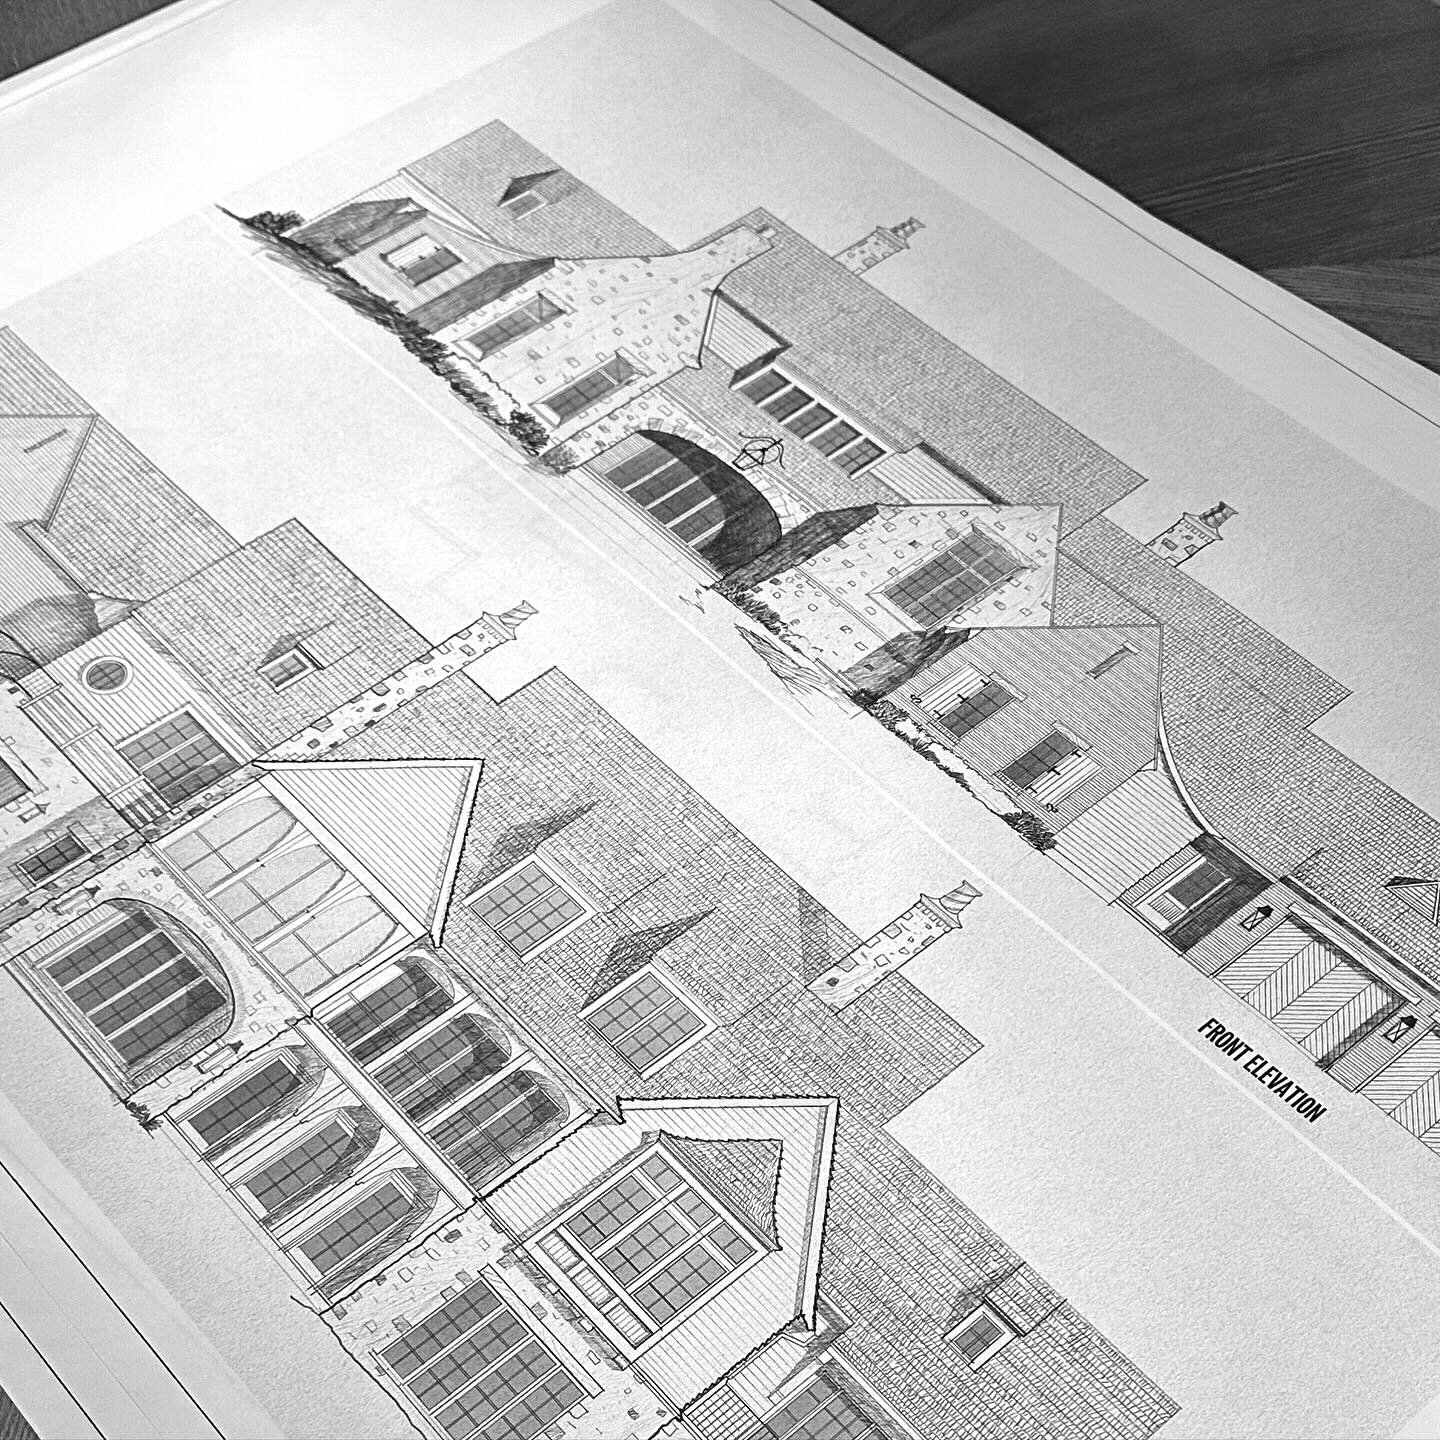 Drawings for a client presentation tomorrow. #houseonalake 
&darr; 
&darr;
&darr;
#architect #TraditionalDesign #ArchitectDesigned #TraditionalHouse #HomeInspiration #Homeinspo #HouseDesign #TraditionalArchitecture #TraditionalHome #TraditionalHomeDe